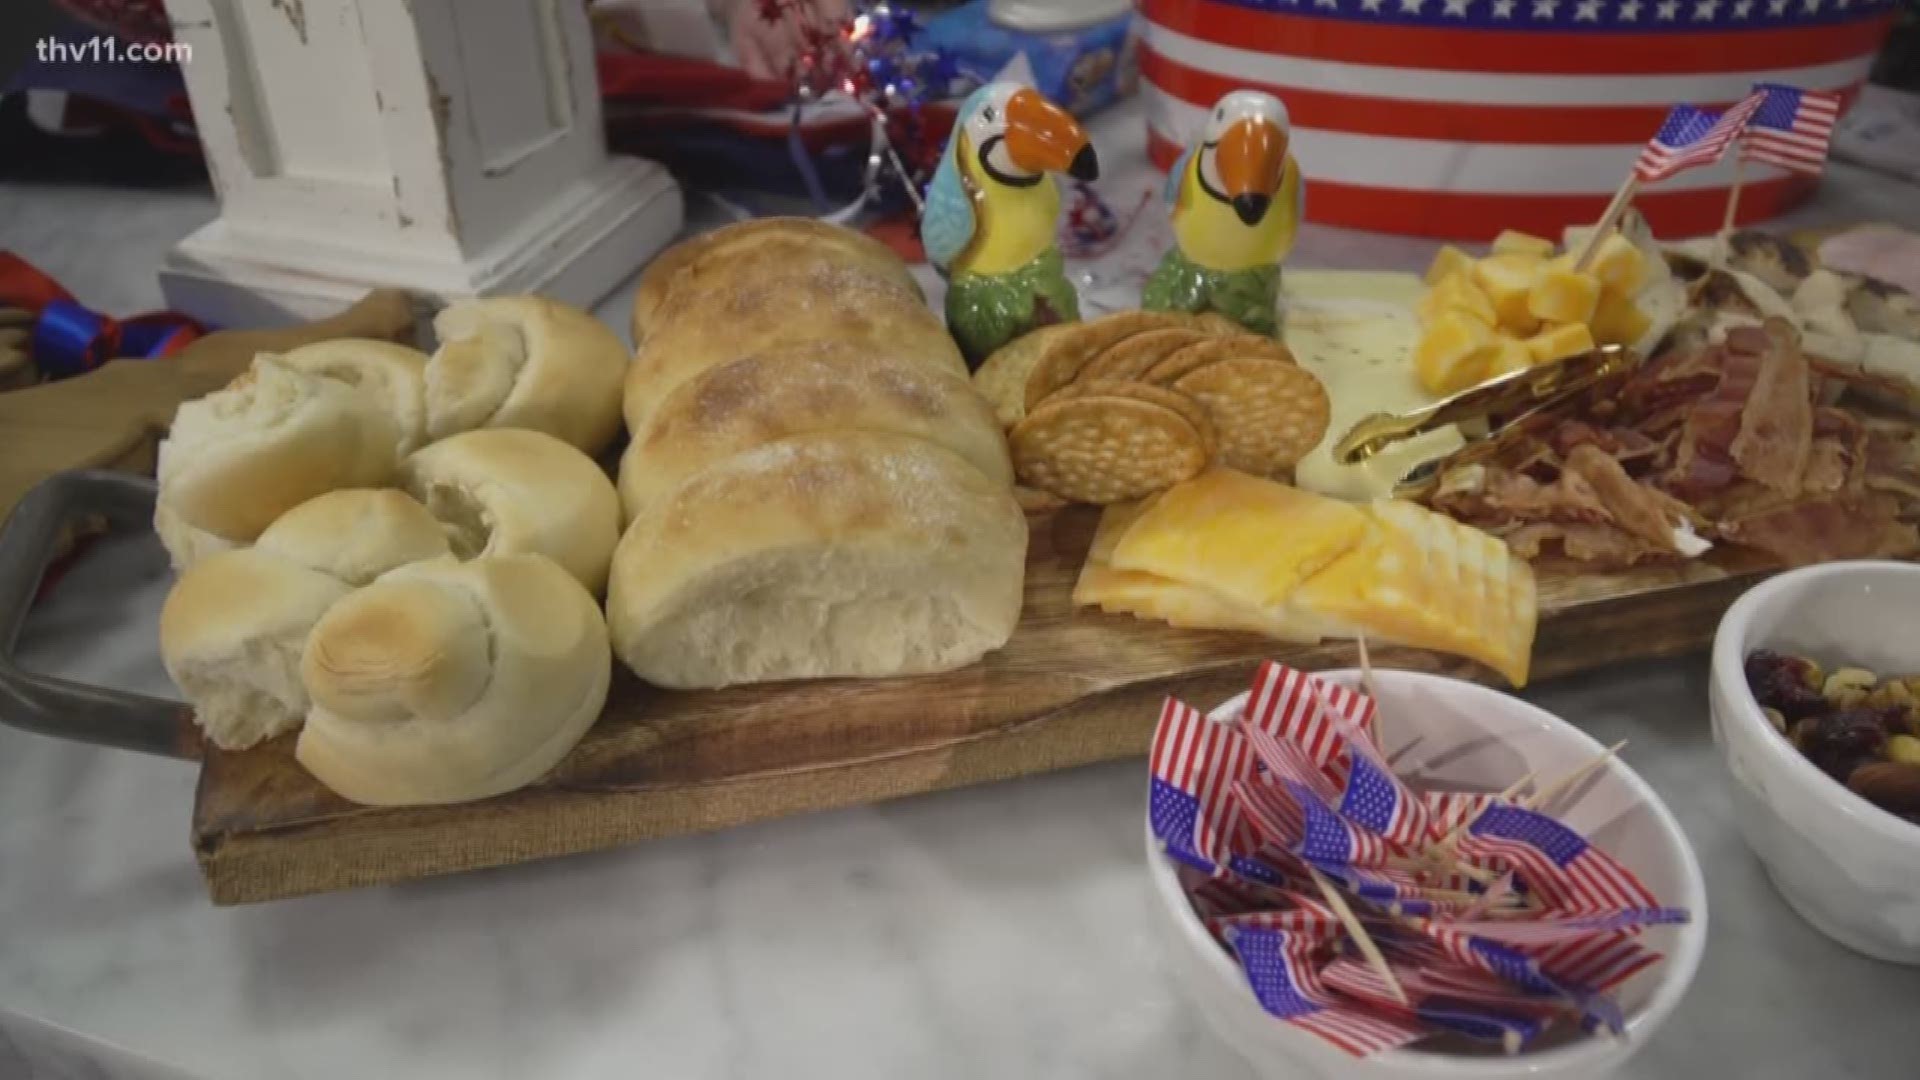 Lifestyle & Food Blogger Pat Downs with Sweet Yellow Cornbread shared her snack ideas for Fourth of July parties.